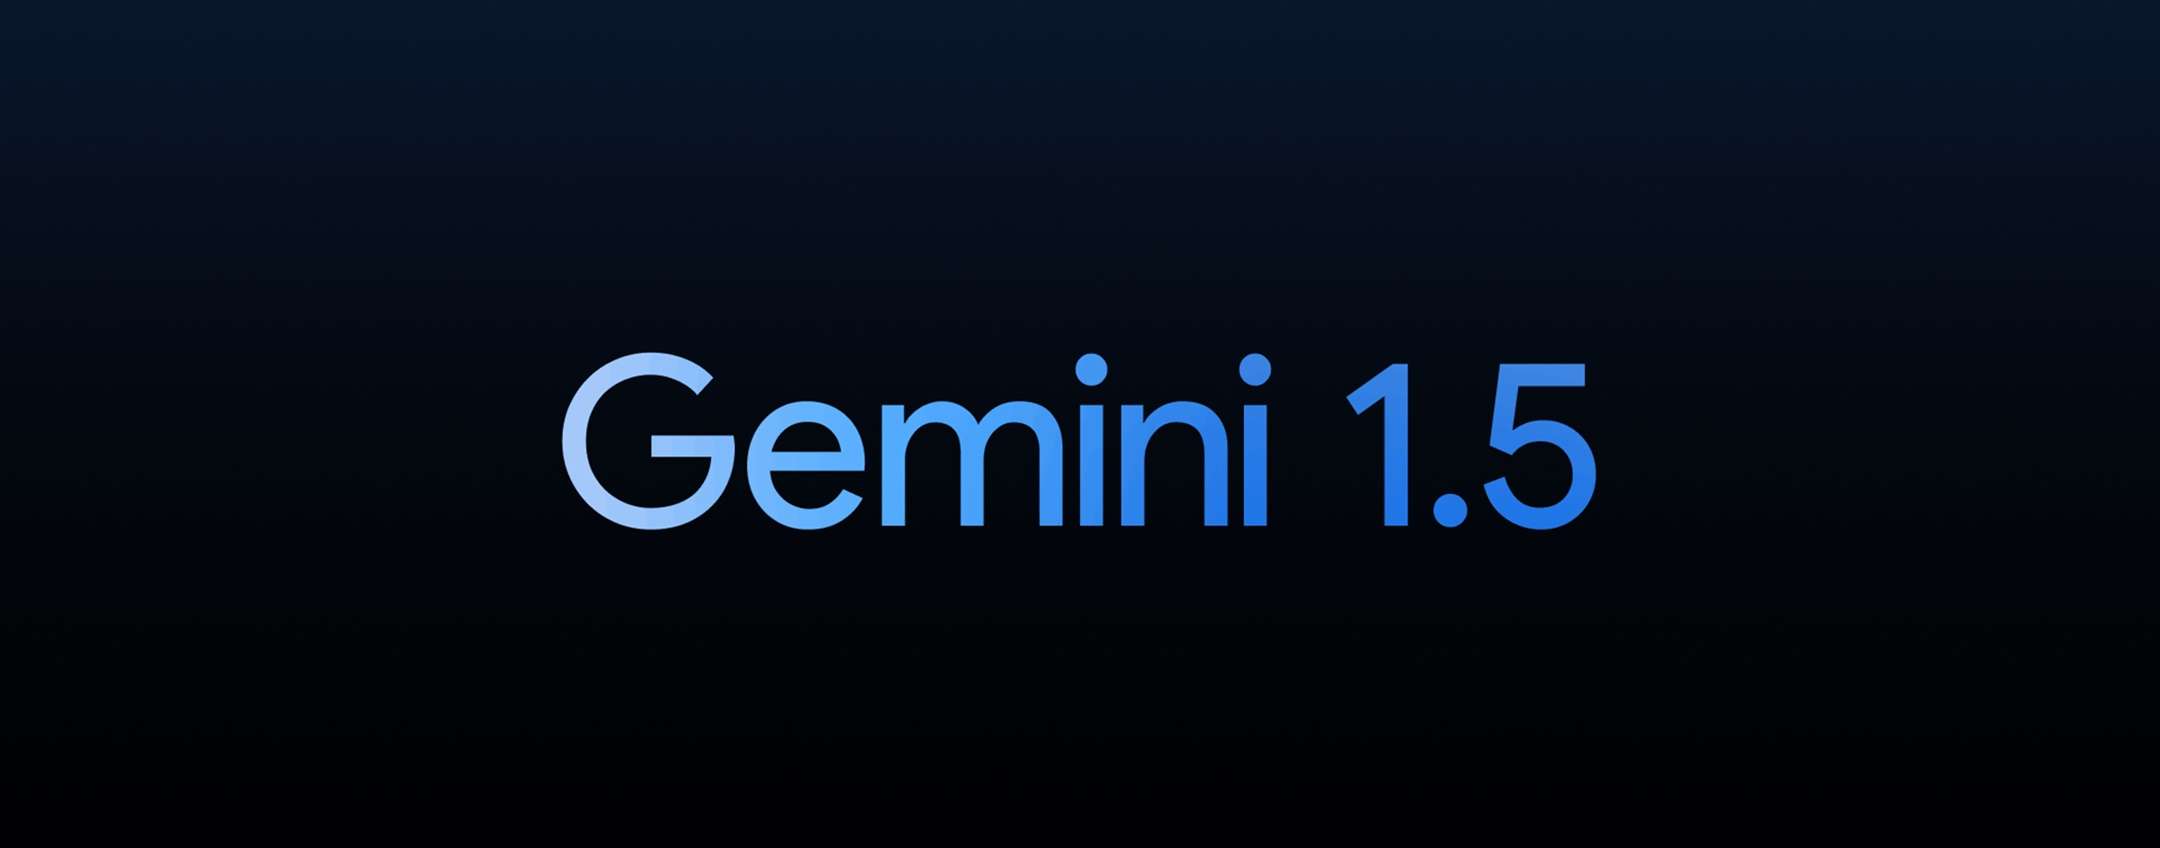 How to activate the chat function with Gemini on Google Chrome